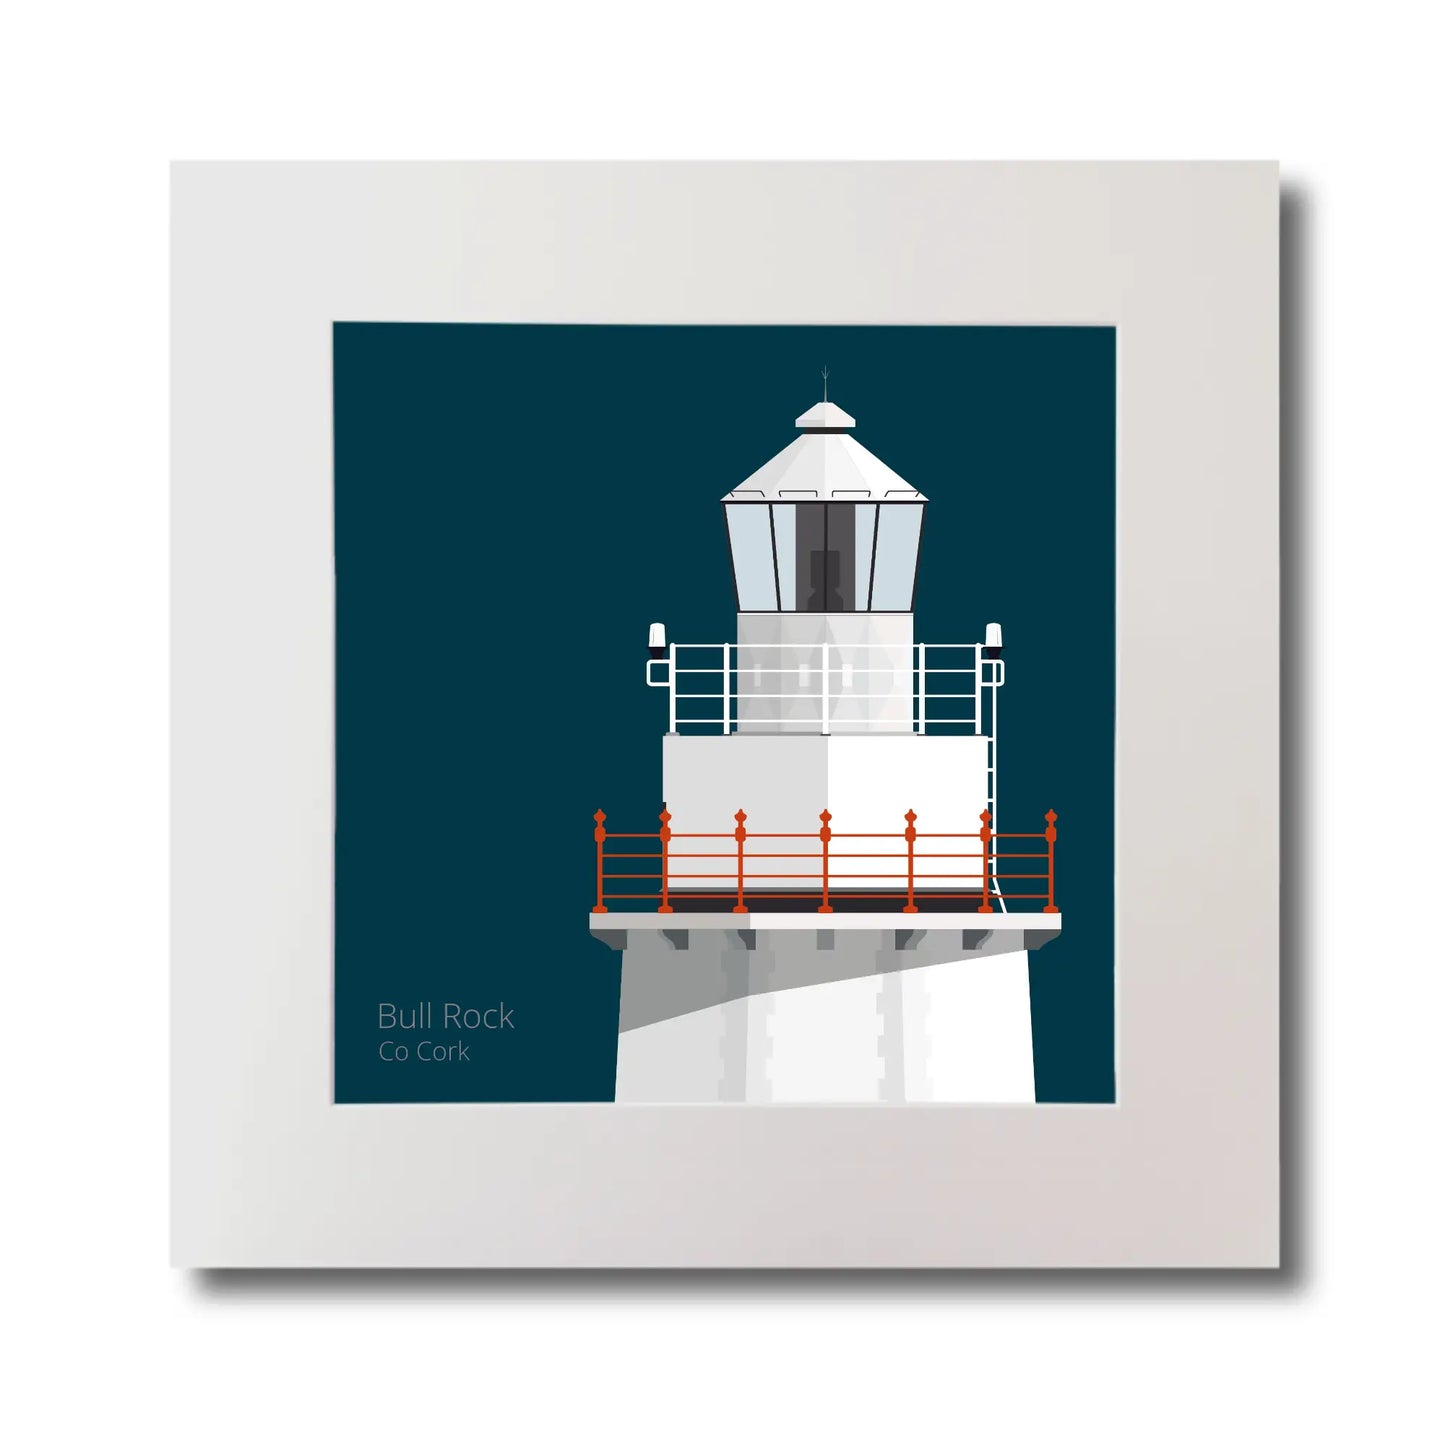 Illustration of Bull Rock lighthouse on a midnight blue background, mounted and measuring 30x30cm.